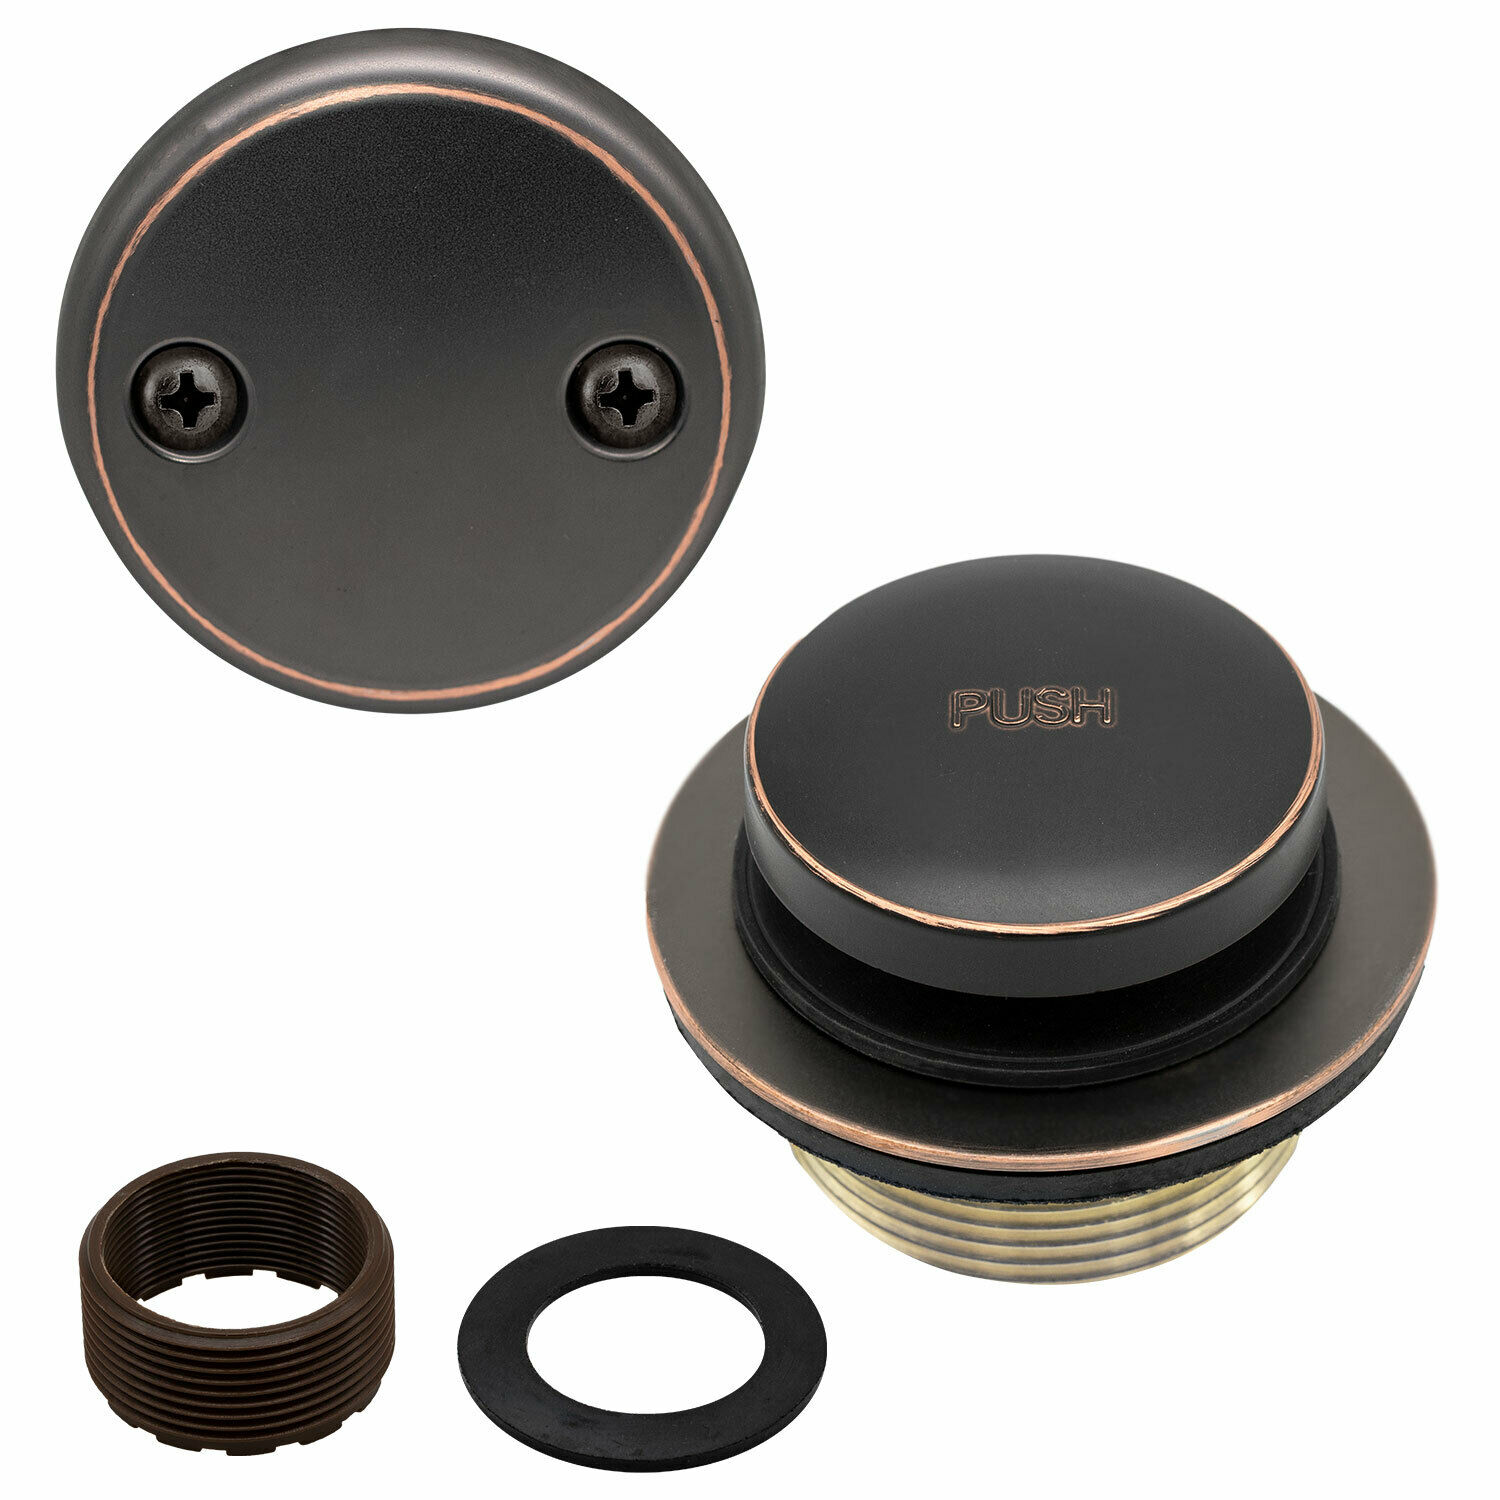 Toe Touch Tub Drain Replacement Bathtub Overflow Cover Kit, Oil Rubbed Bronze